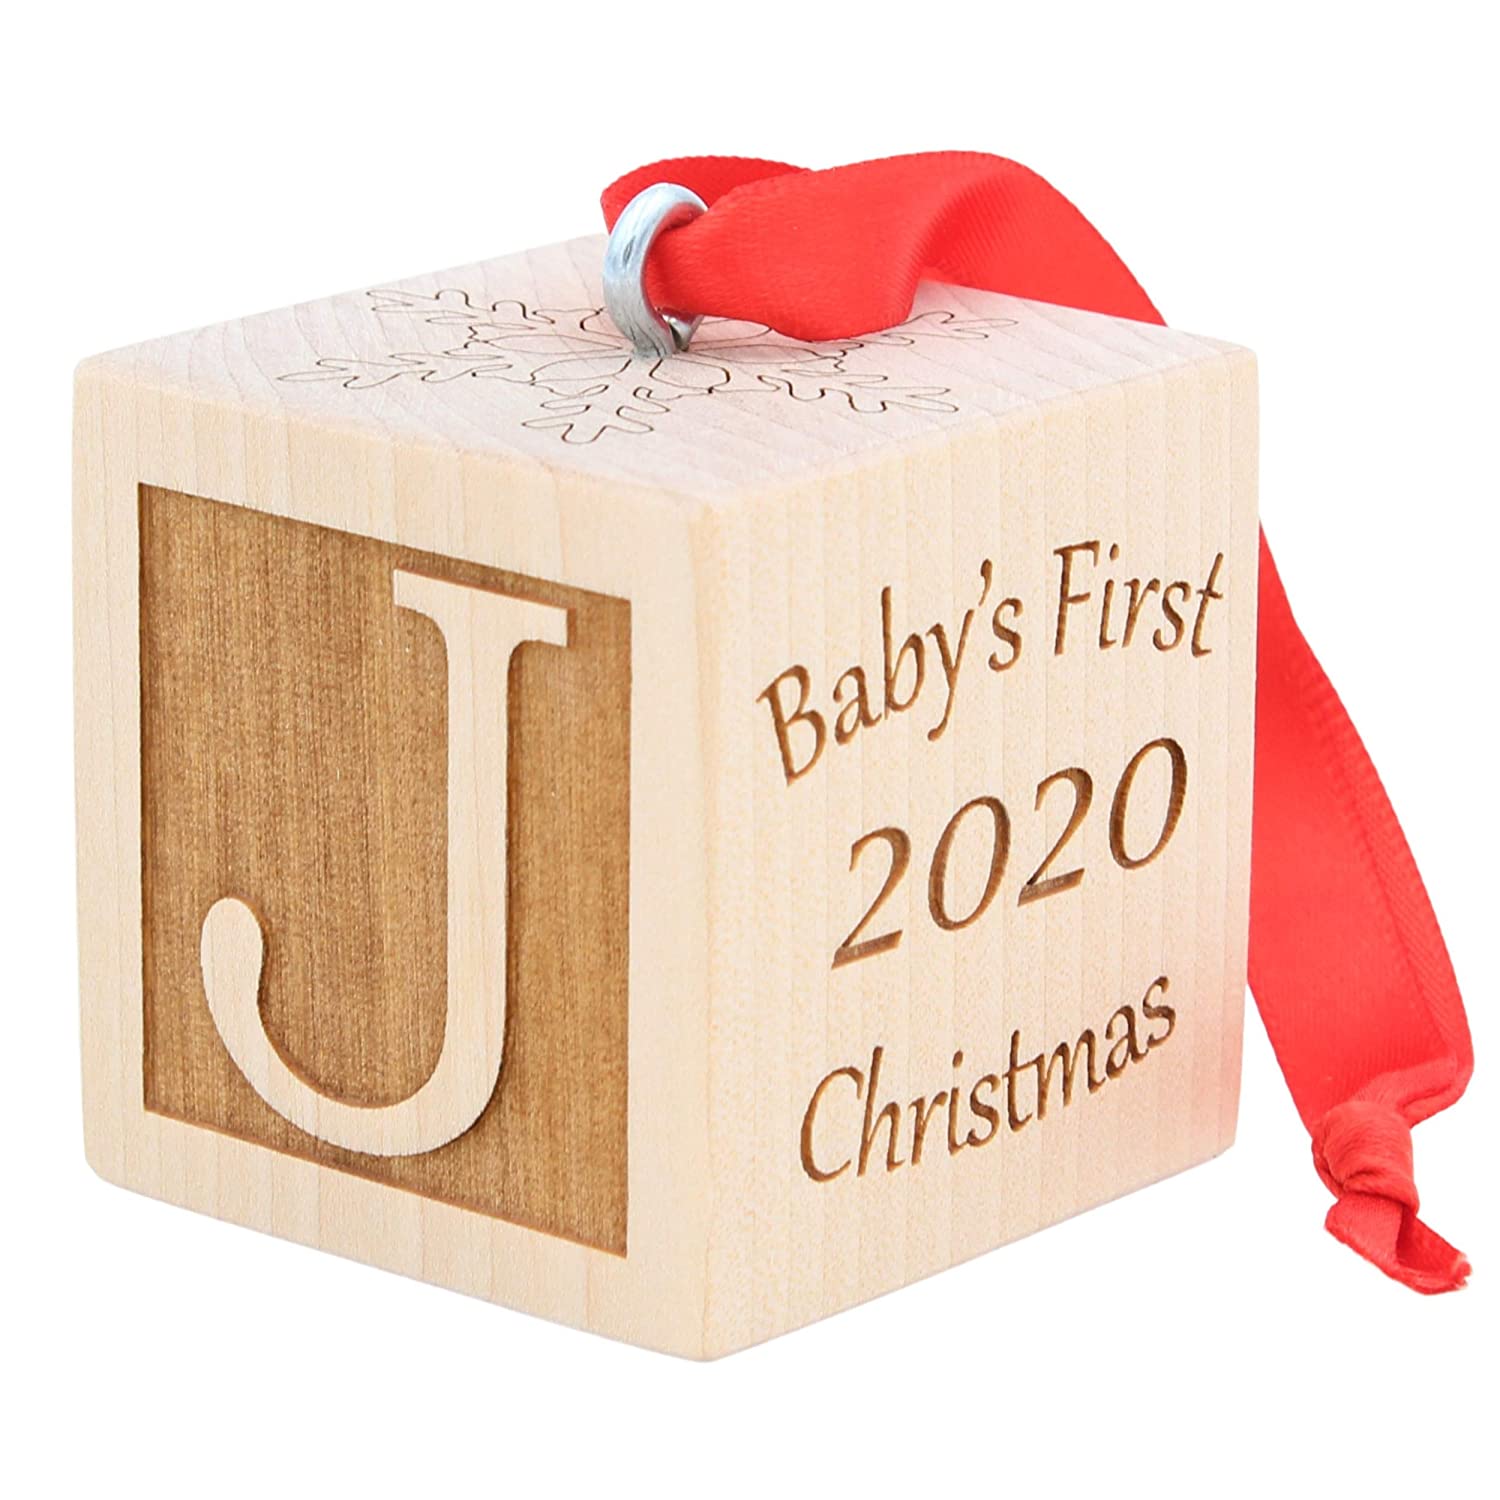 Details about   Personalised Christmas Mum Gifts New Baby Presents Keepsake Framed Baby Boy 